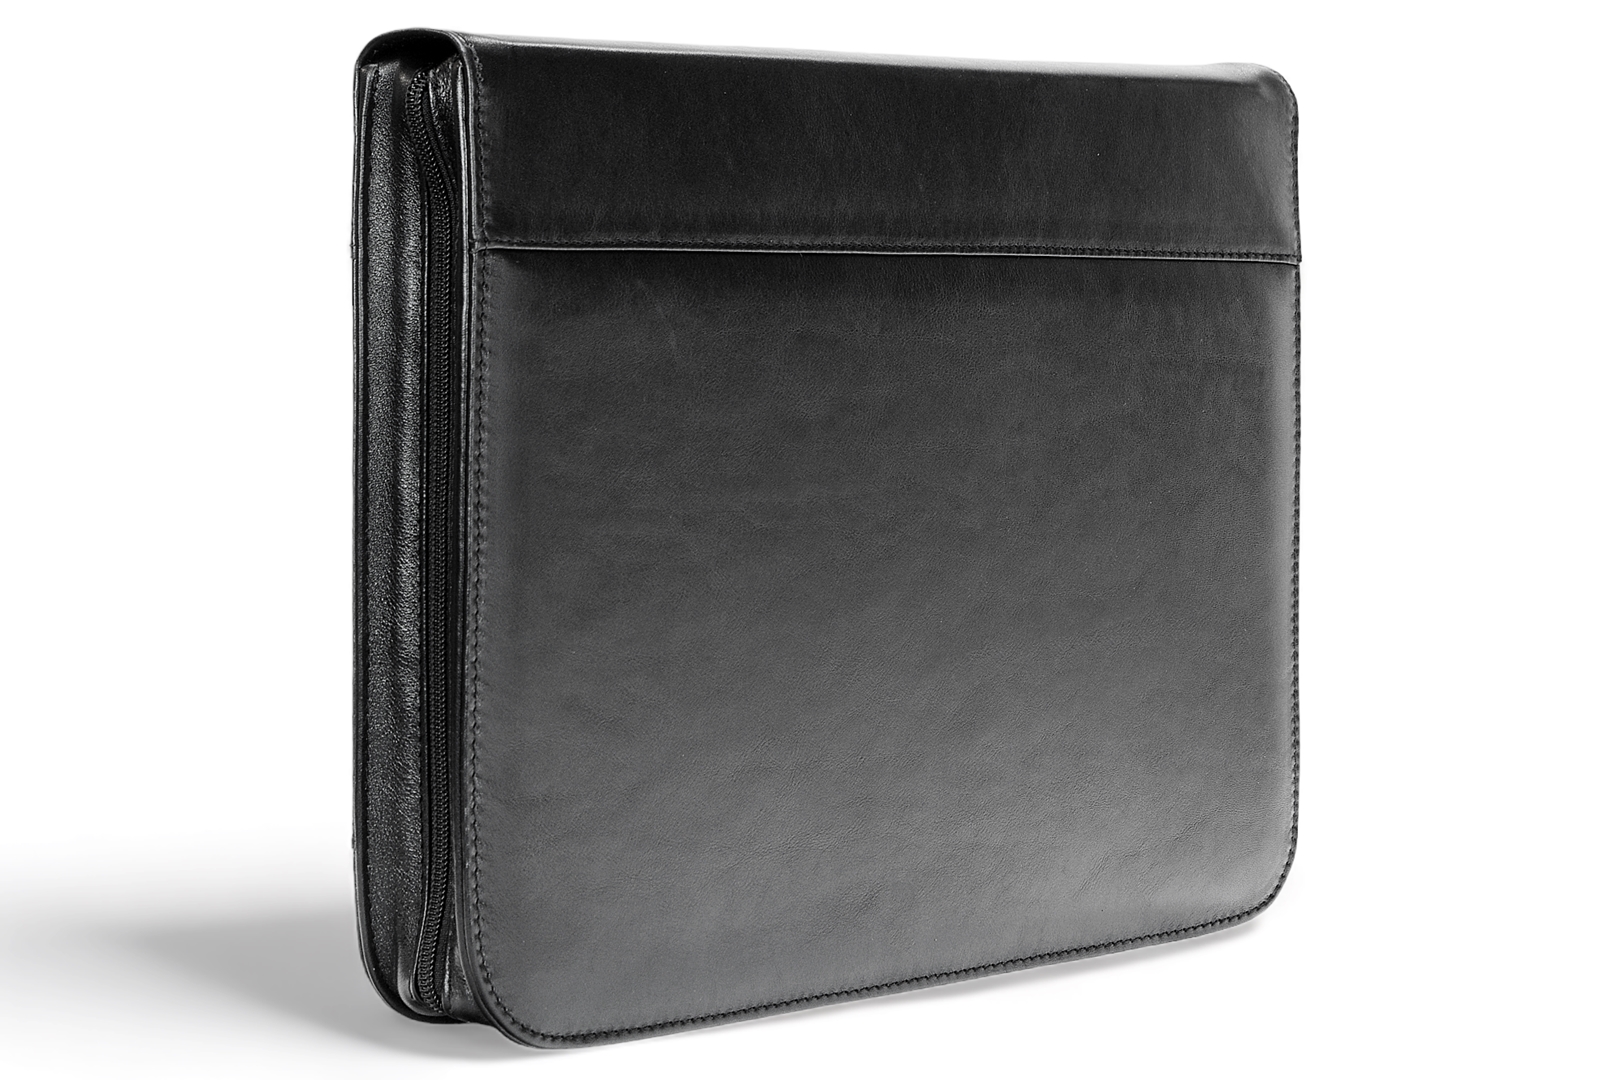 A4 zippered conference folder made of genuine leather. 19 BL 0-1F